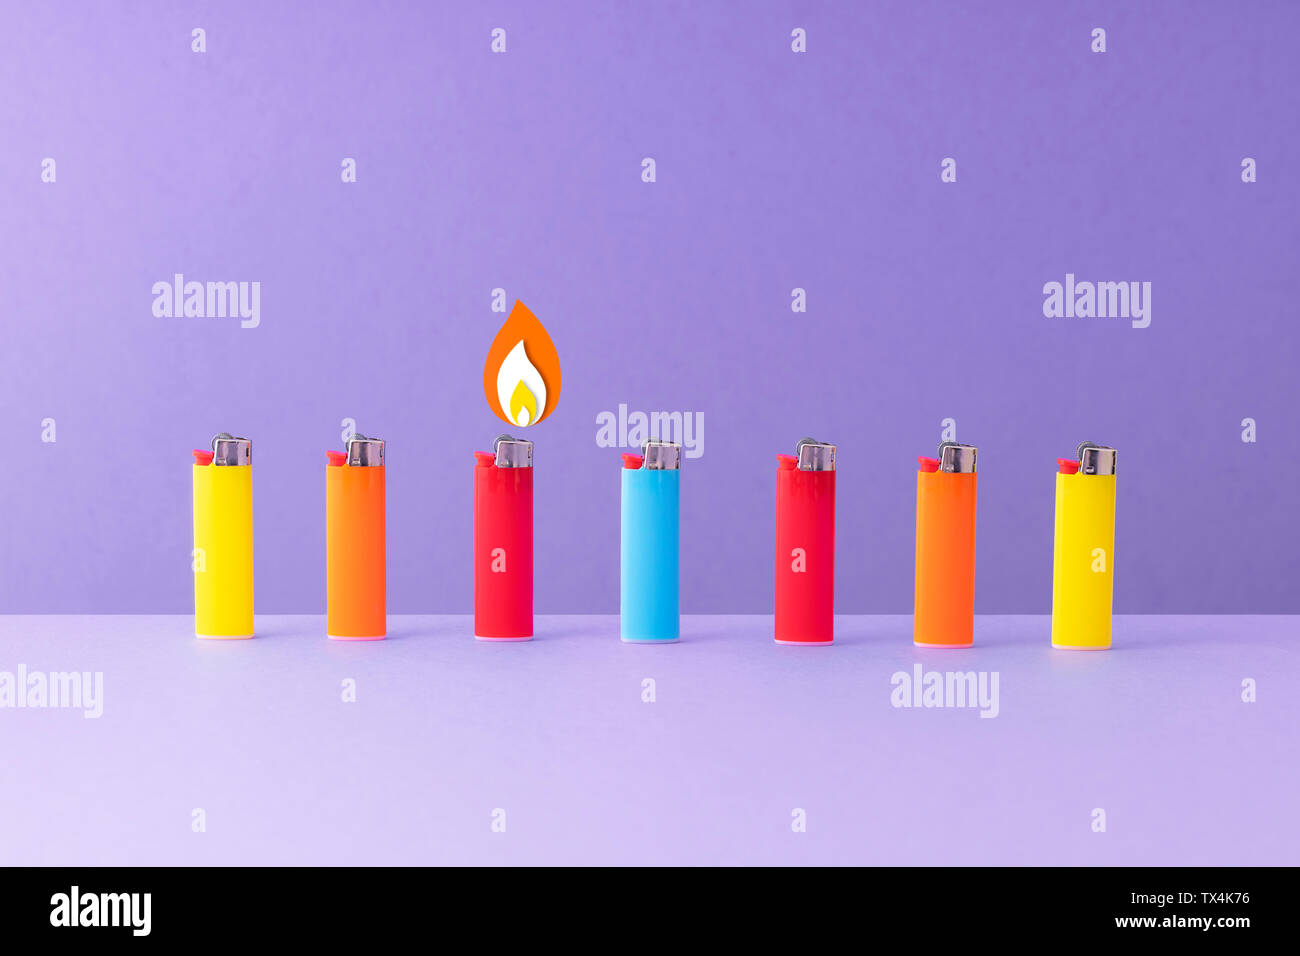 Row of colorful lighters against purple background Stock Photo